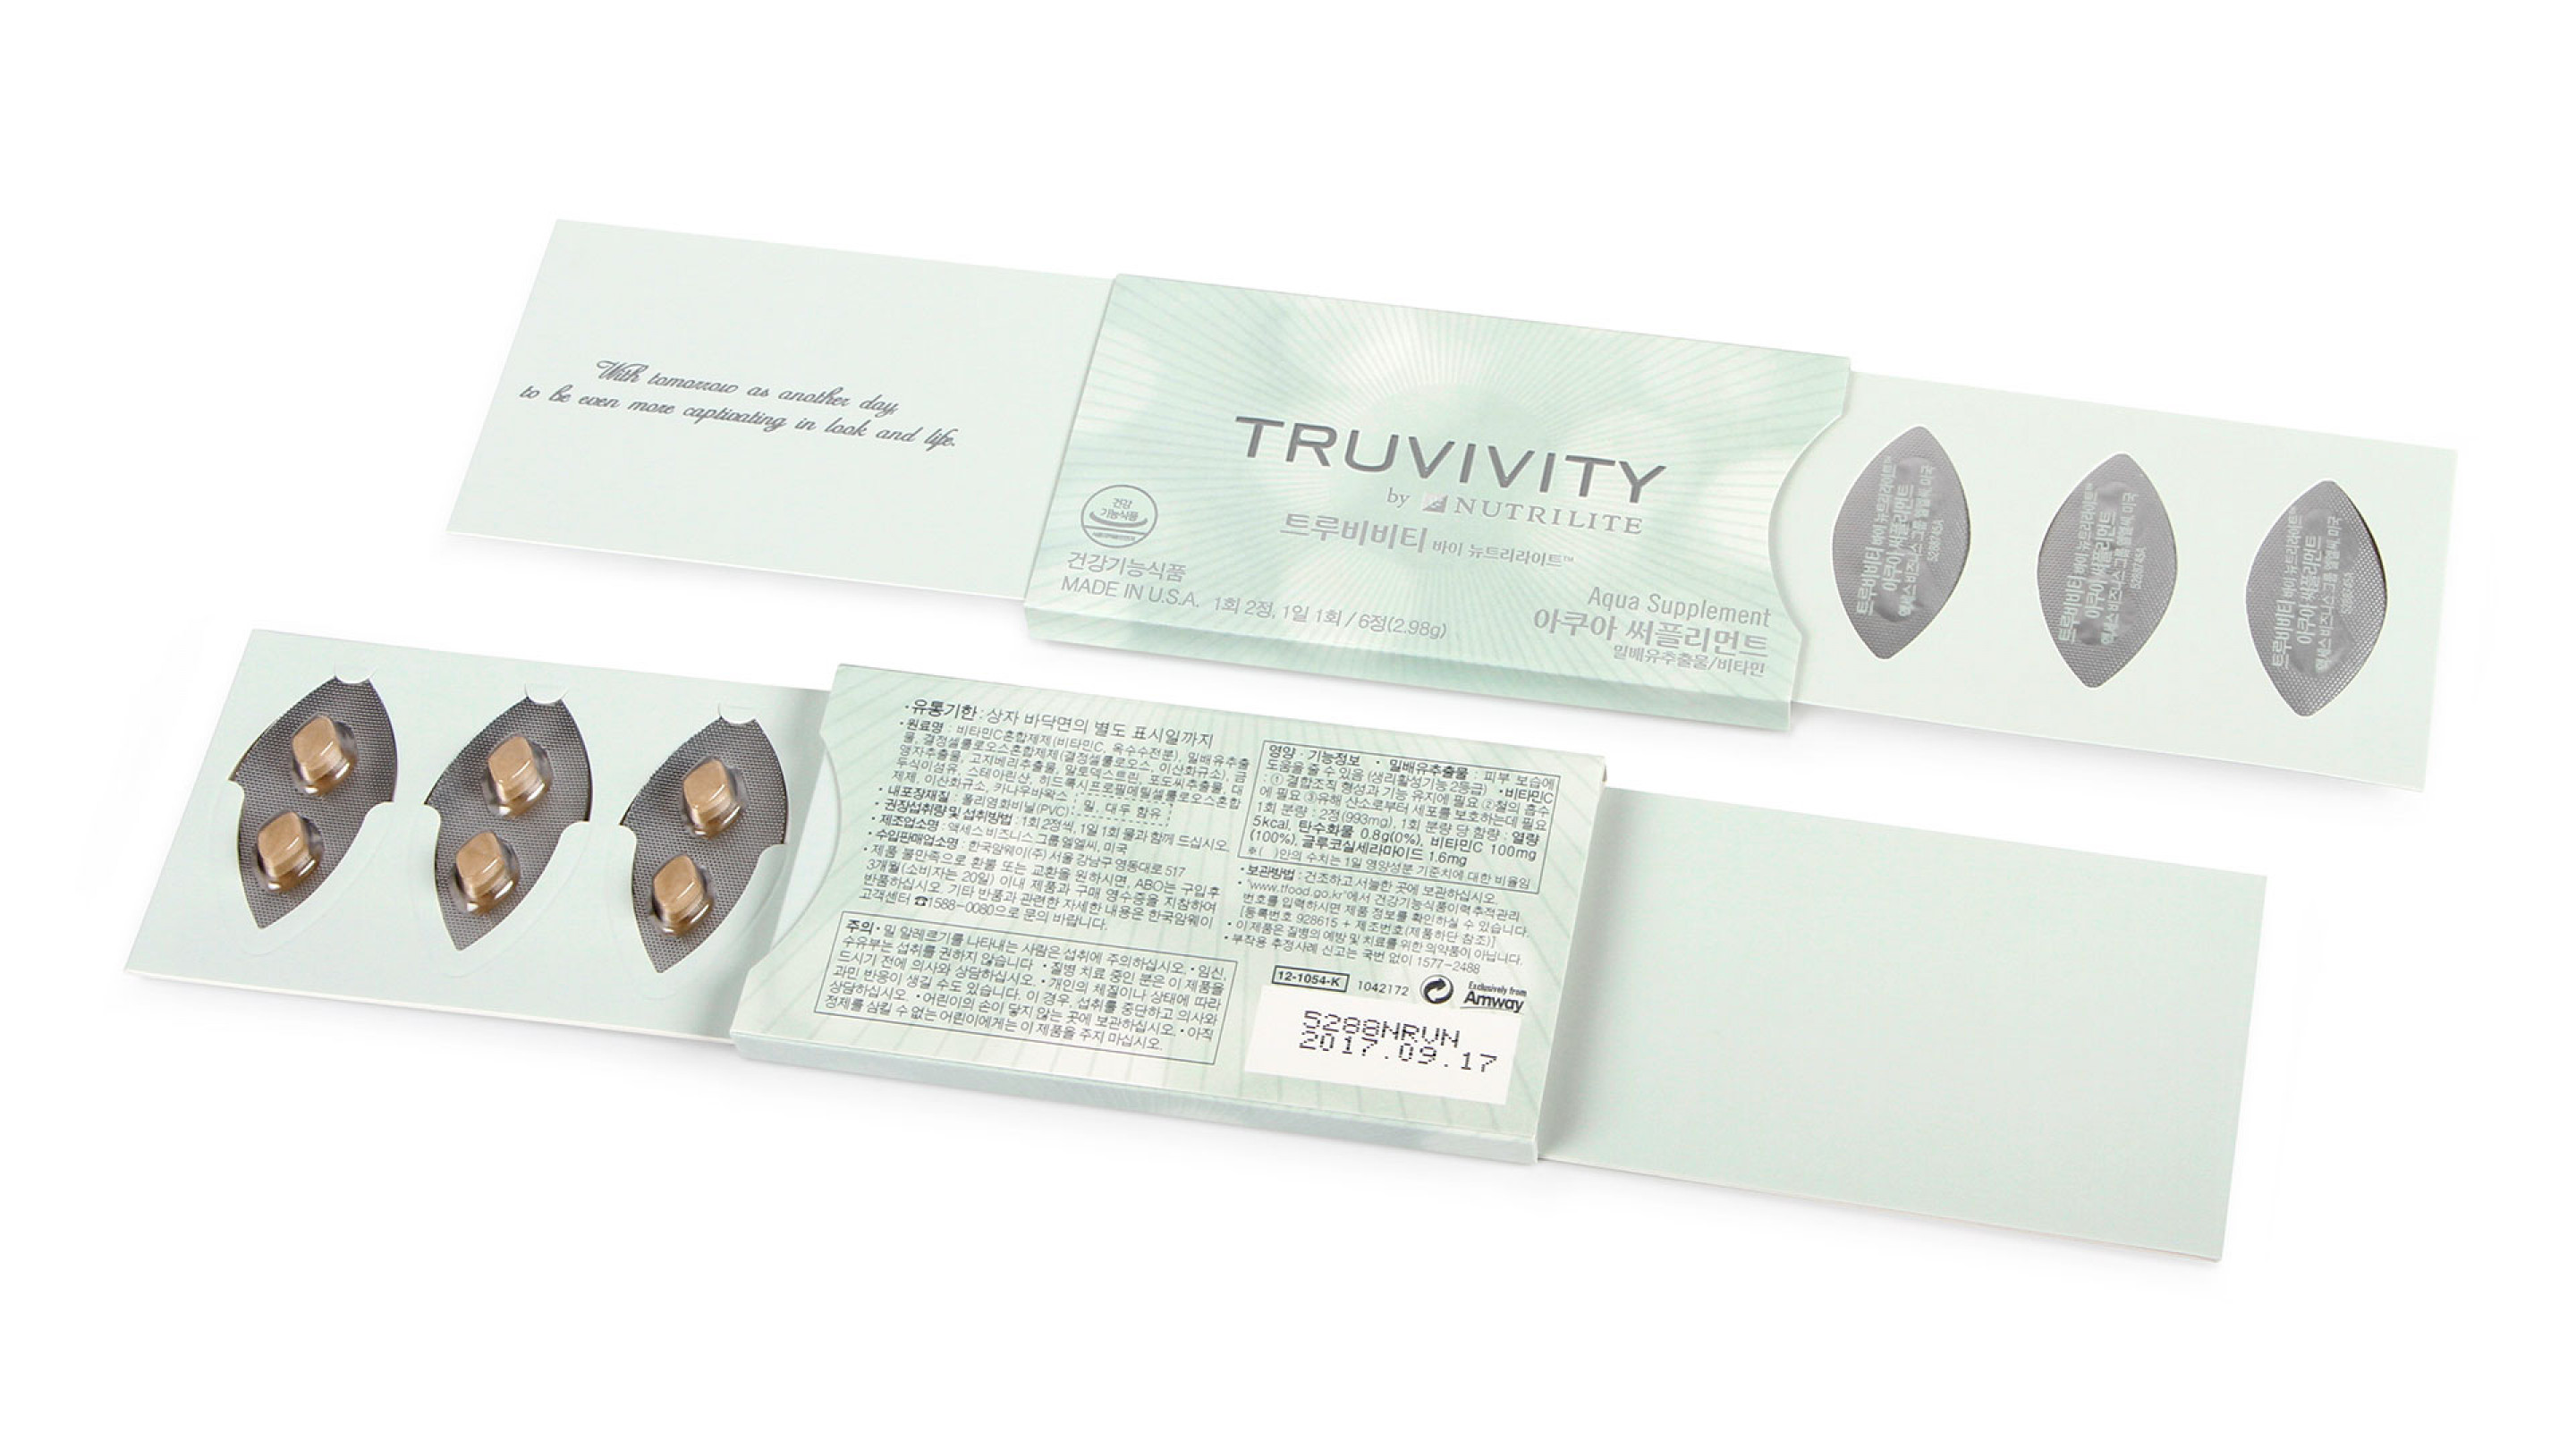 Amway Truvivity by Nutrilite Blister Packaging